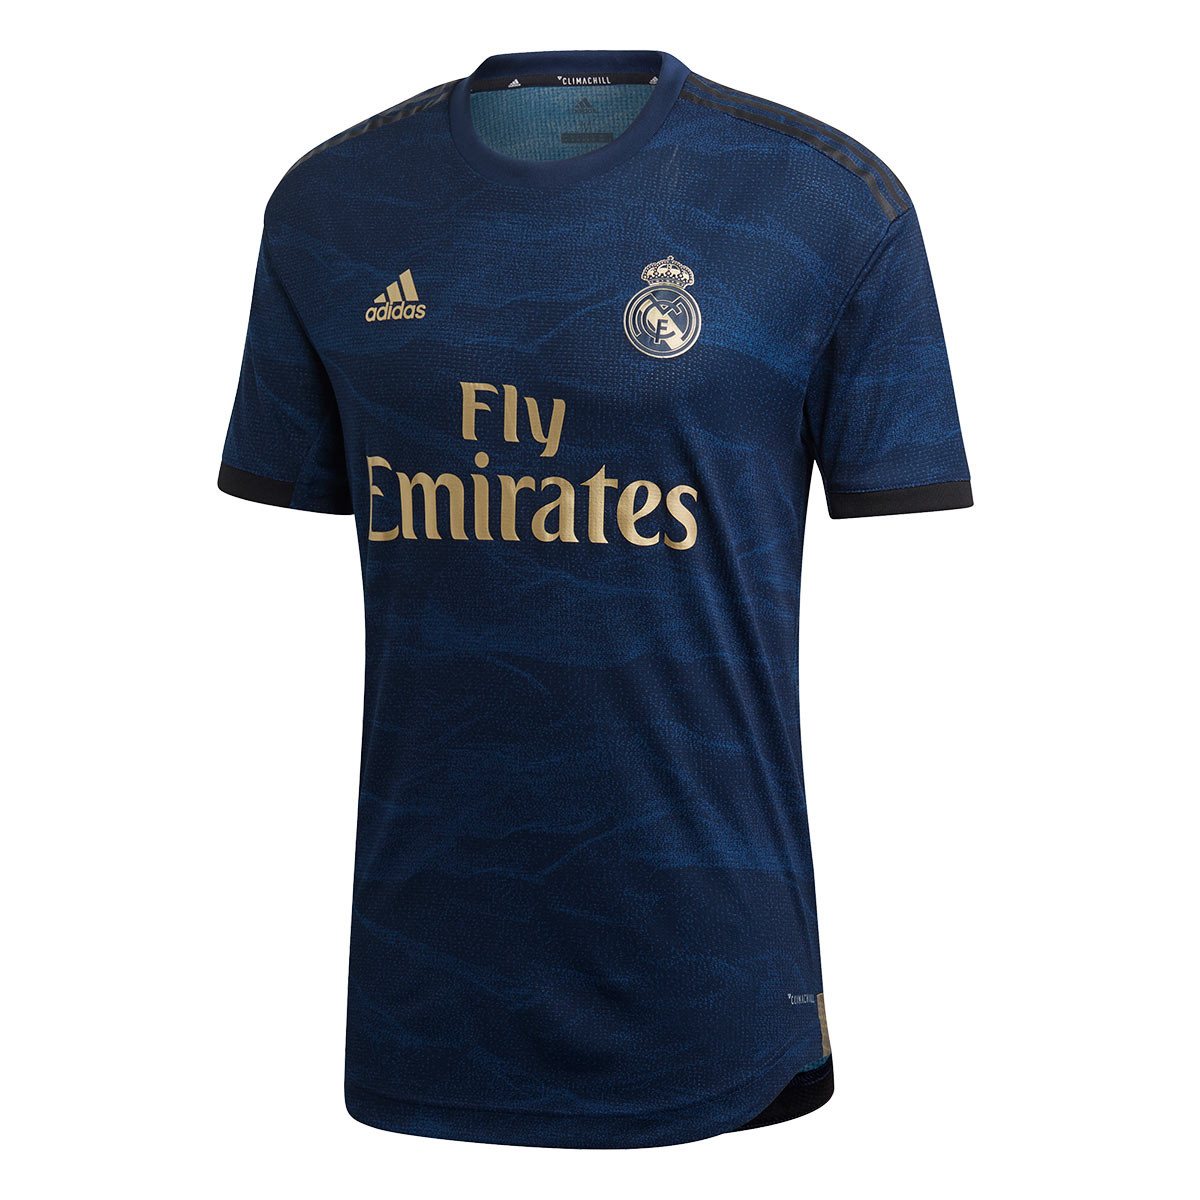 real madrid official jersey